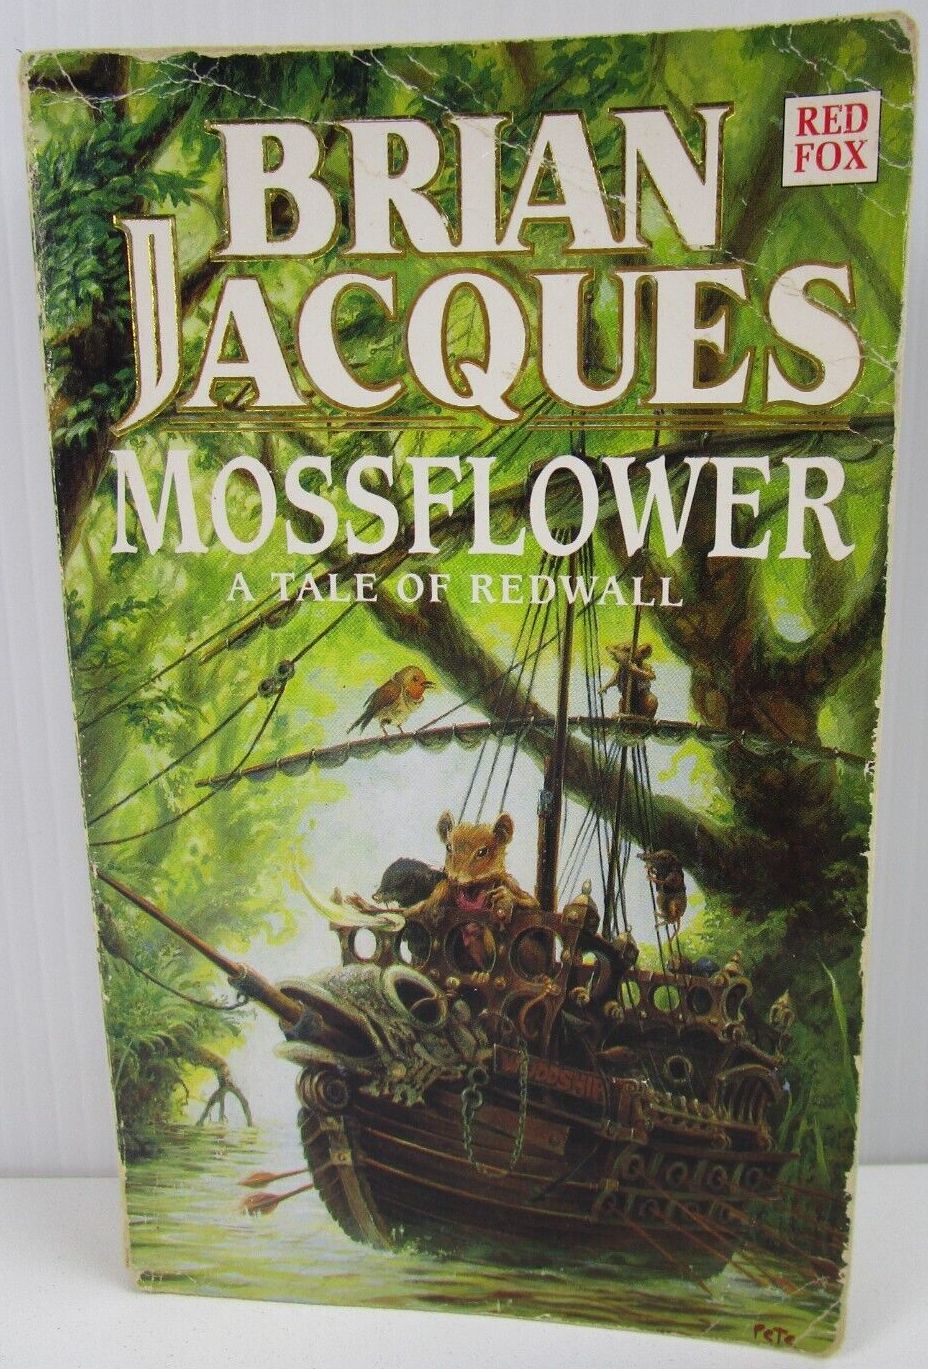 mossflower by brian jacques